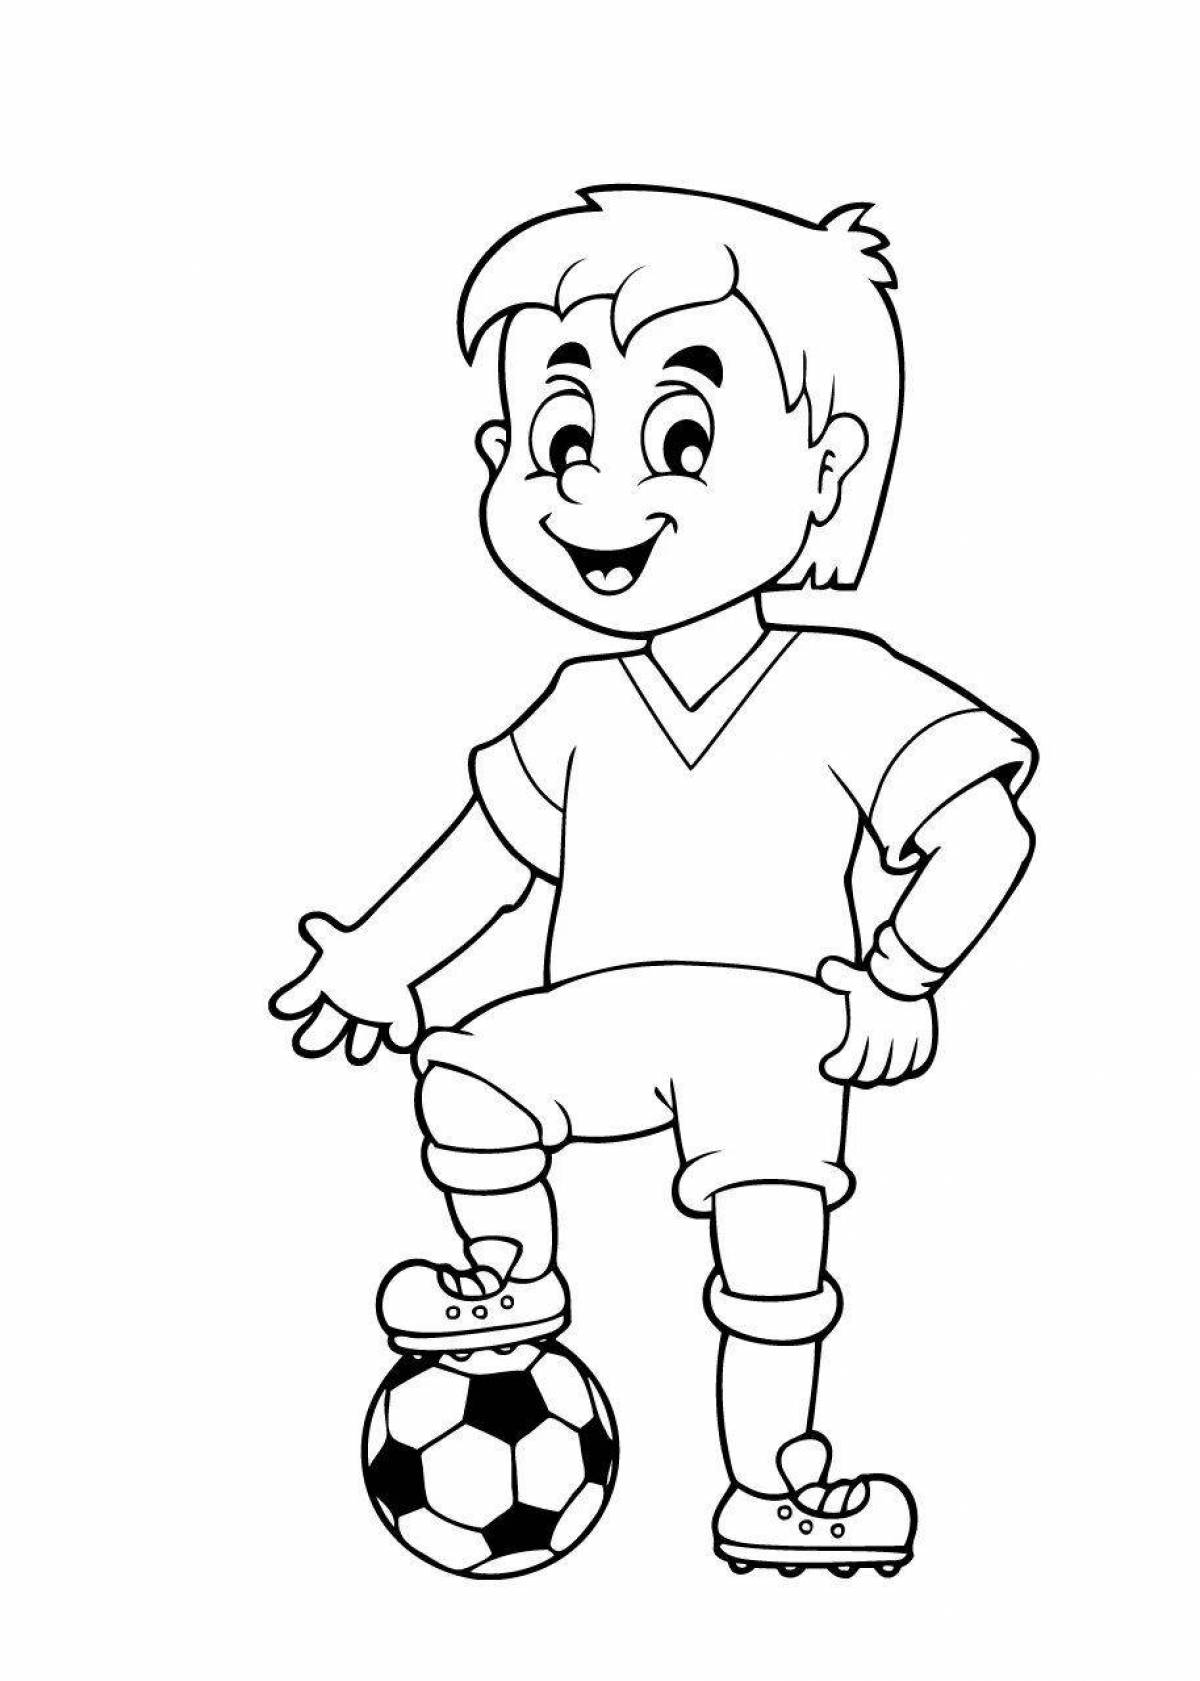 Coloring page inspired boy playing football